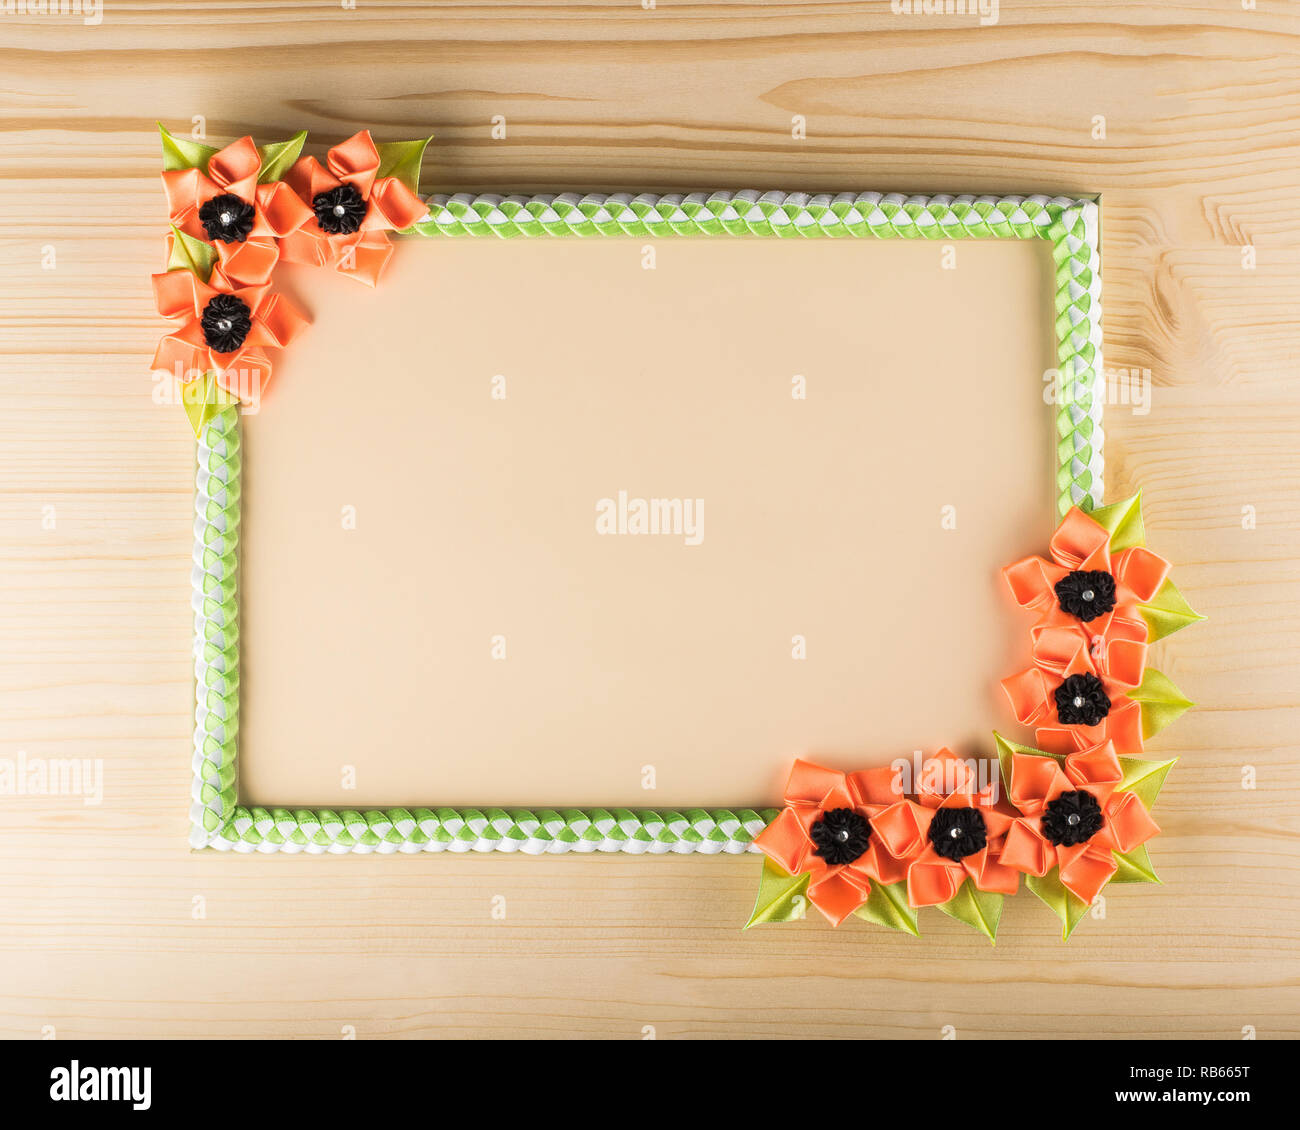 Photo frame with decorative flowers on wooden background Stock Photo